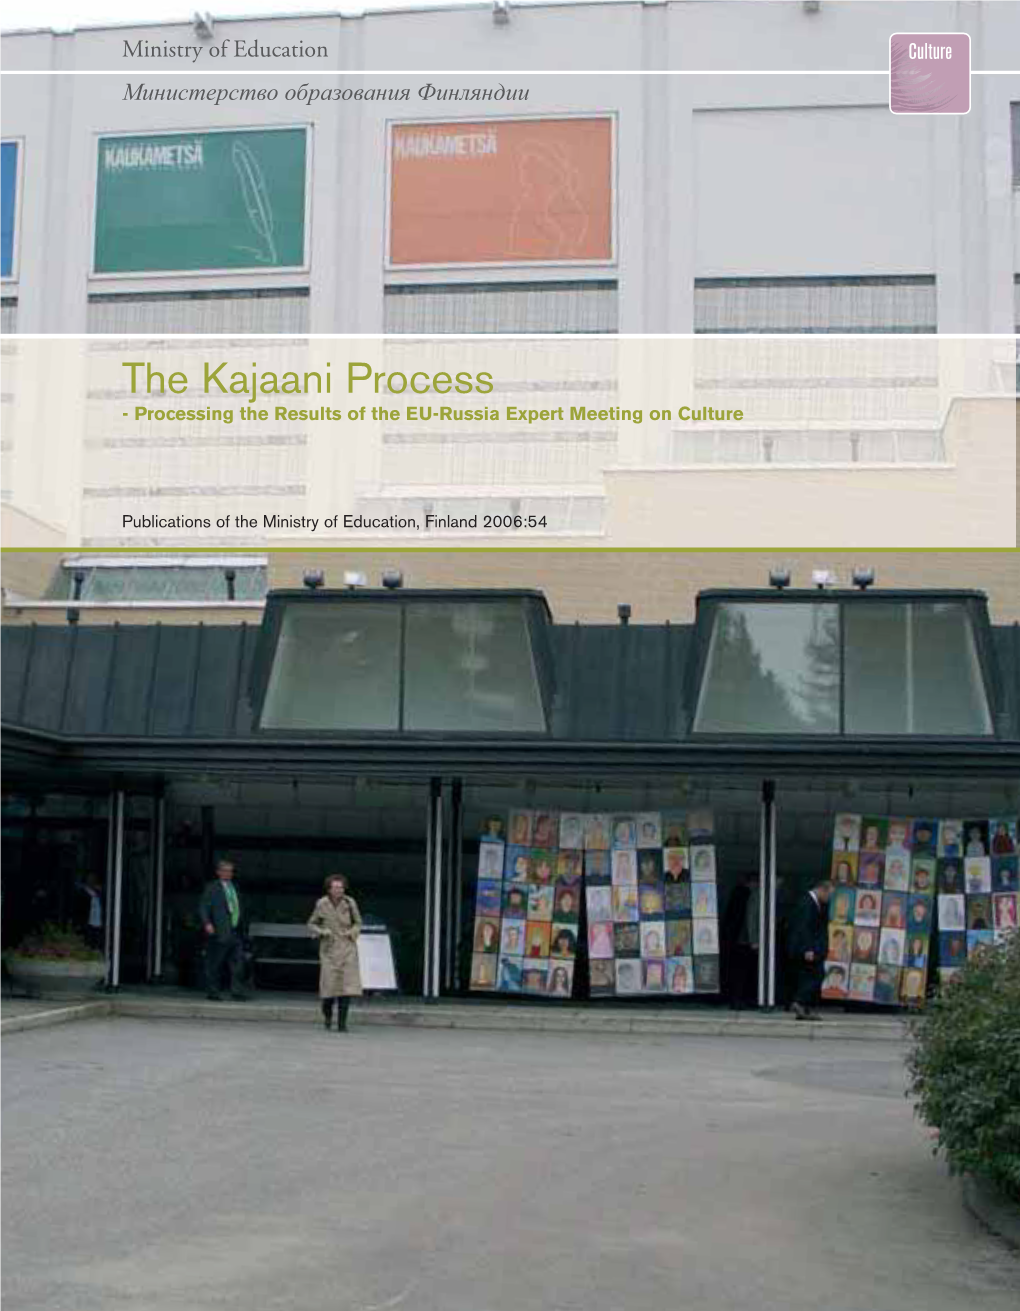 The Kajaani Process - Processing the Results of the EU-Russia Expert Meeting on Culture